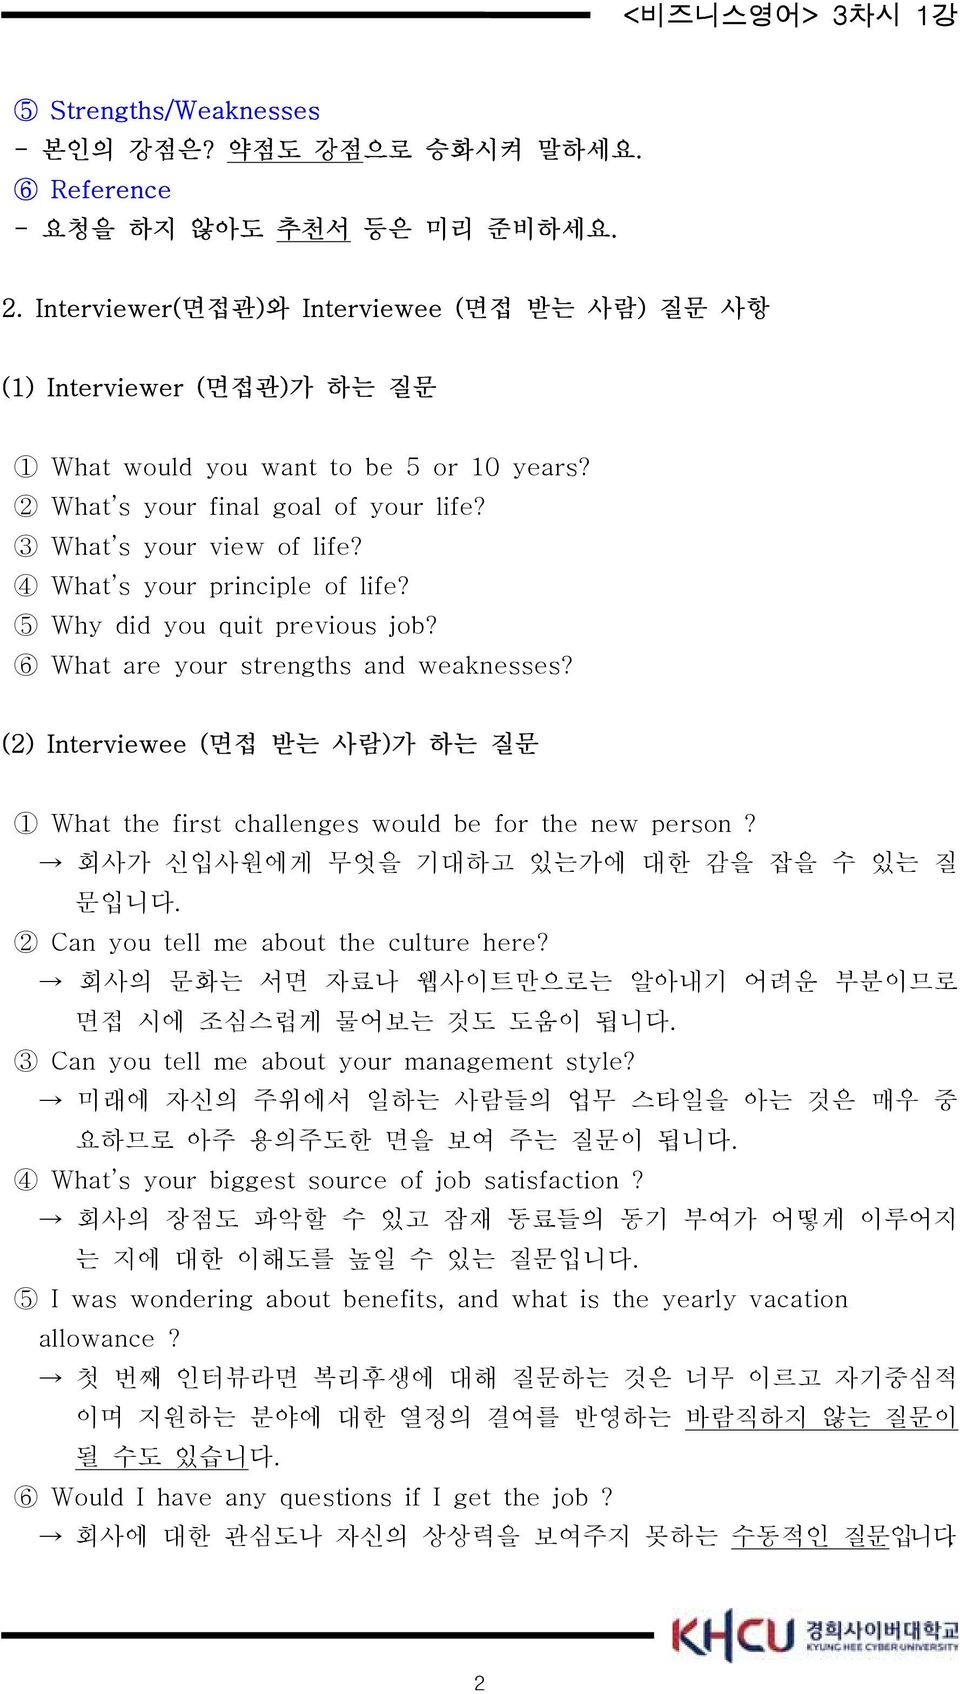 4 What s your principle of life? 5 Why did you quit previous job? 6 What are your strengths and weaknesses? (2) Interviewee (면접 받는 사람)가 하는 질문 1 What the first challenges would be for the new person?